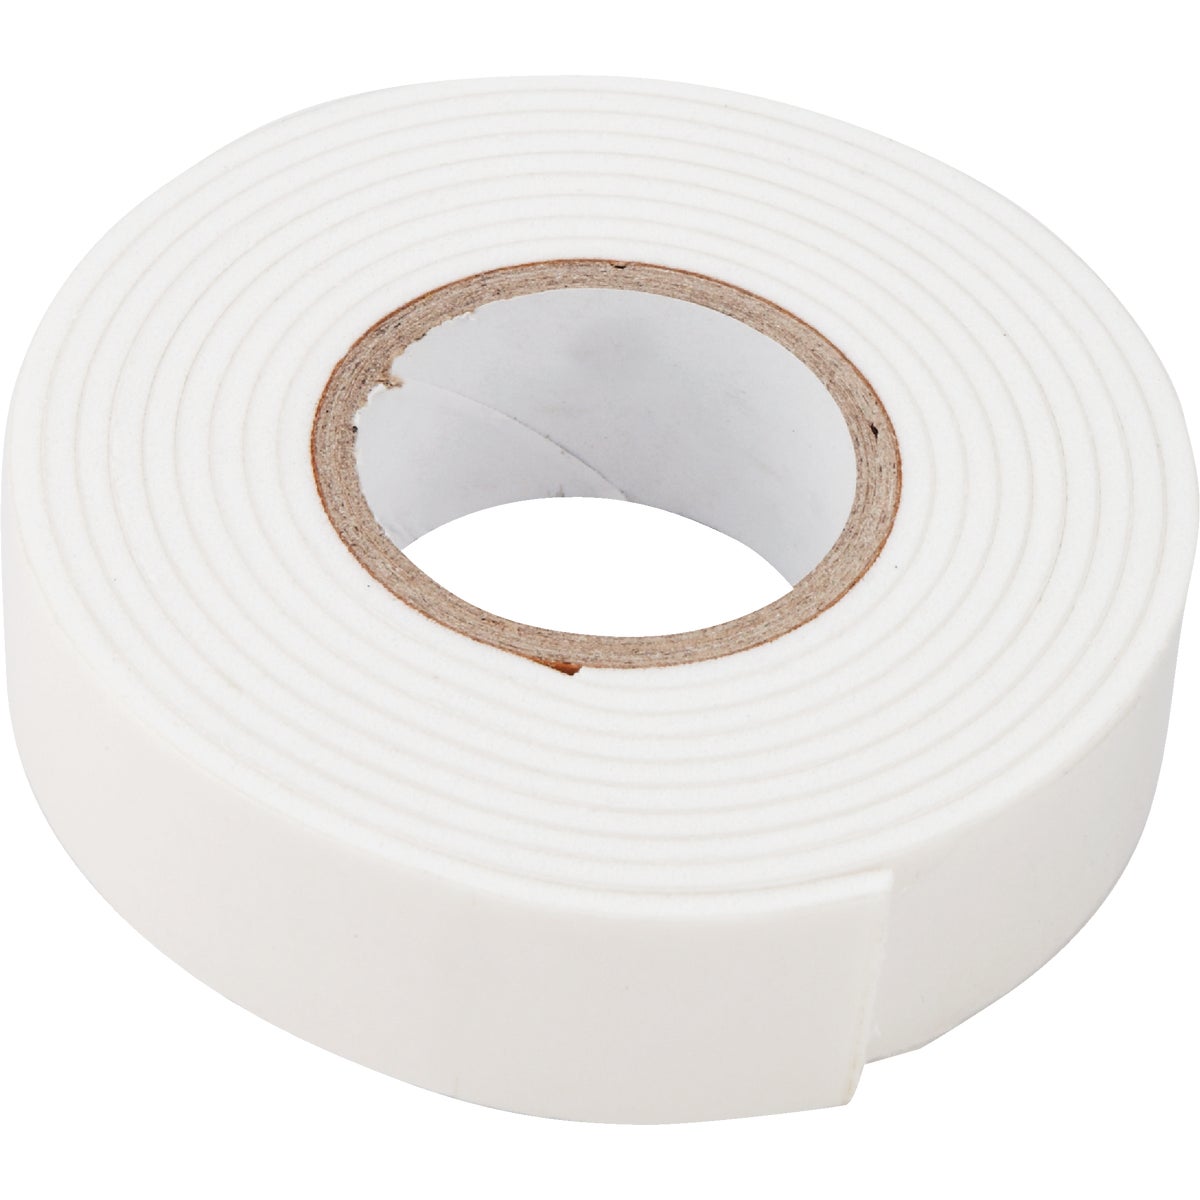 Custom Accessories 3/4 In. x 5 Ft. x 1/16 In. Thick Double-Faced Camper Seal Tape